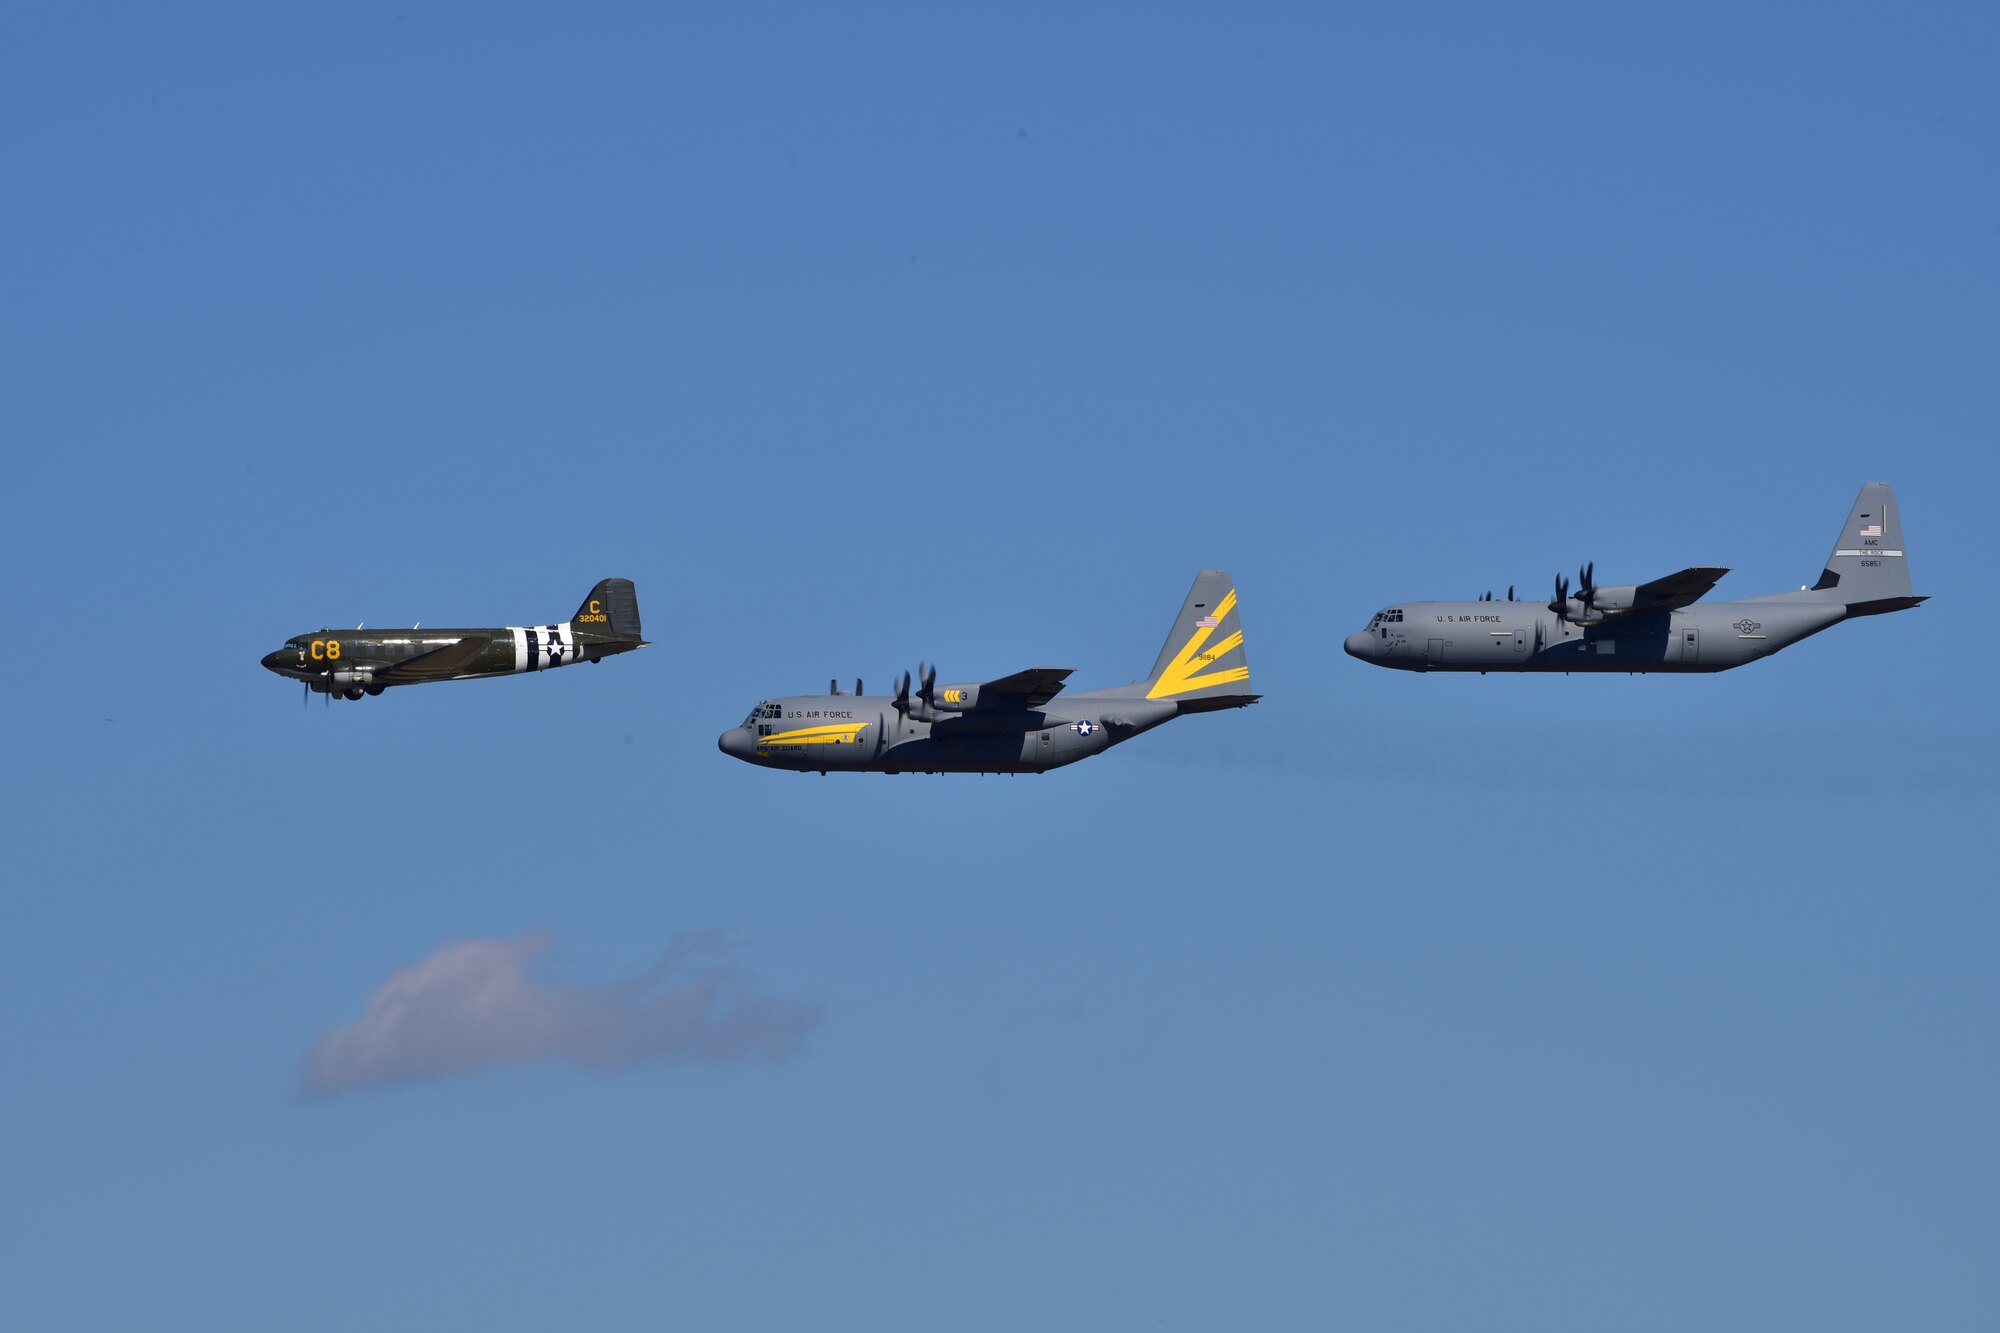 A green Douglas C-47 Skytrain aircraft, a gray C-130H aircraft with yellow stripes, and a gray C-130J aircraft fly in the sky